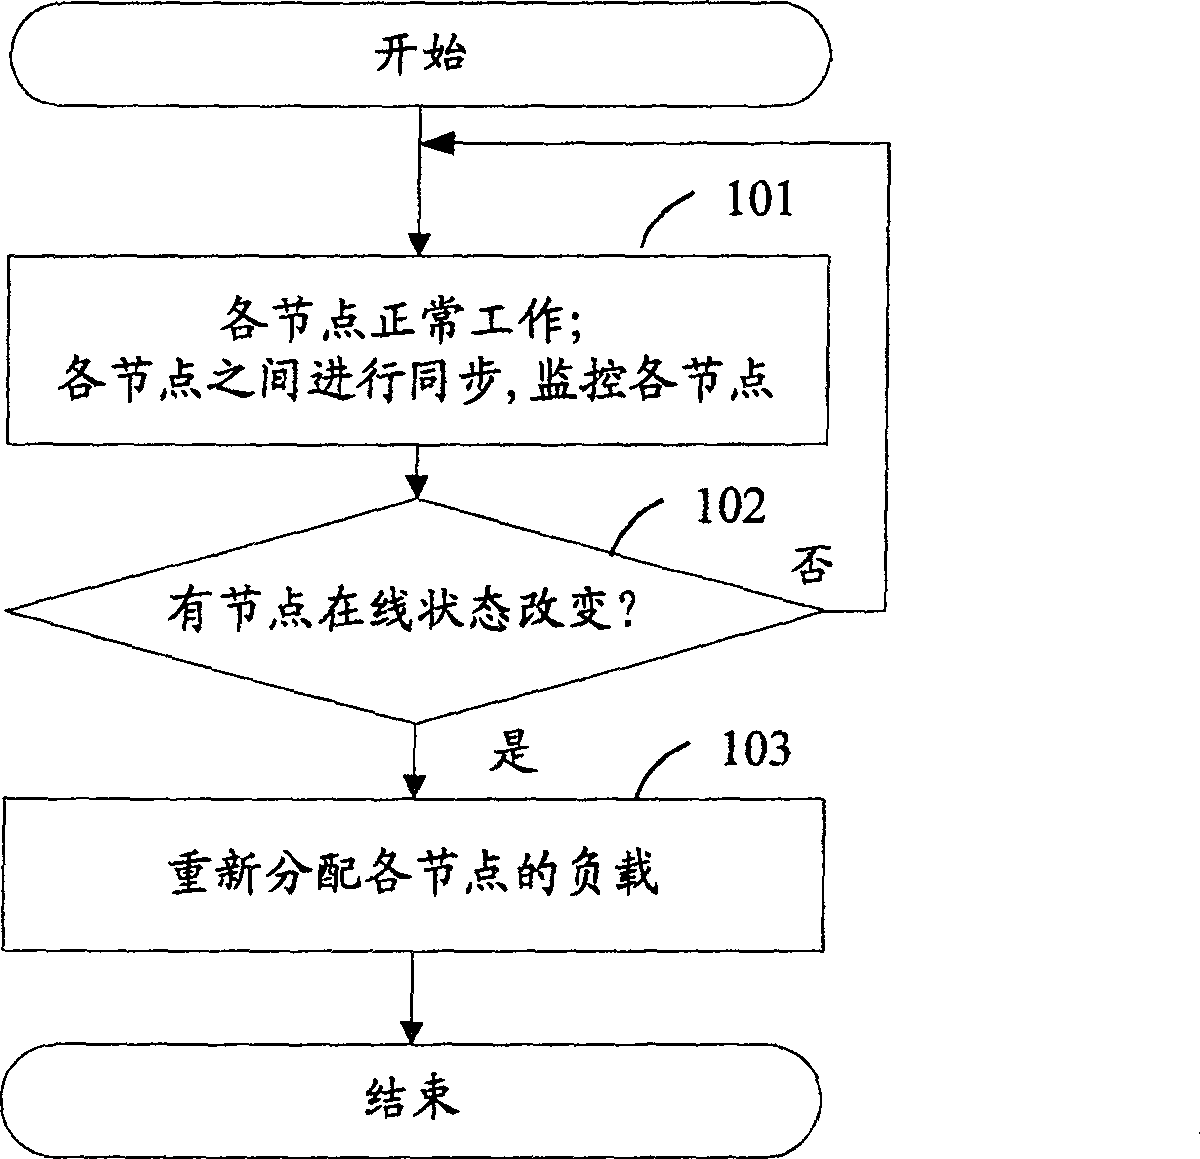 Method for realizing high-usability of network security equipment under cluster mode